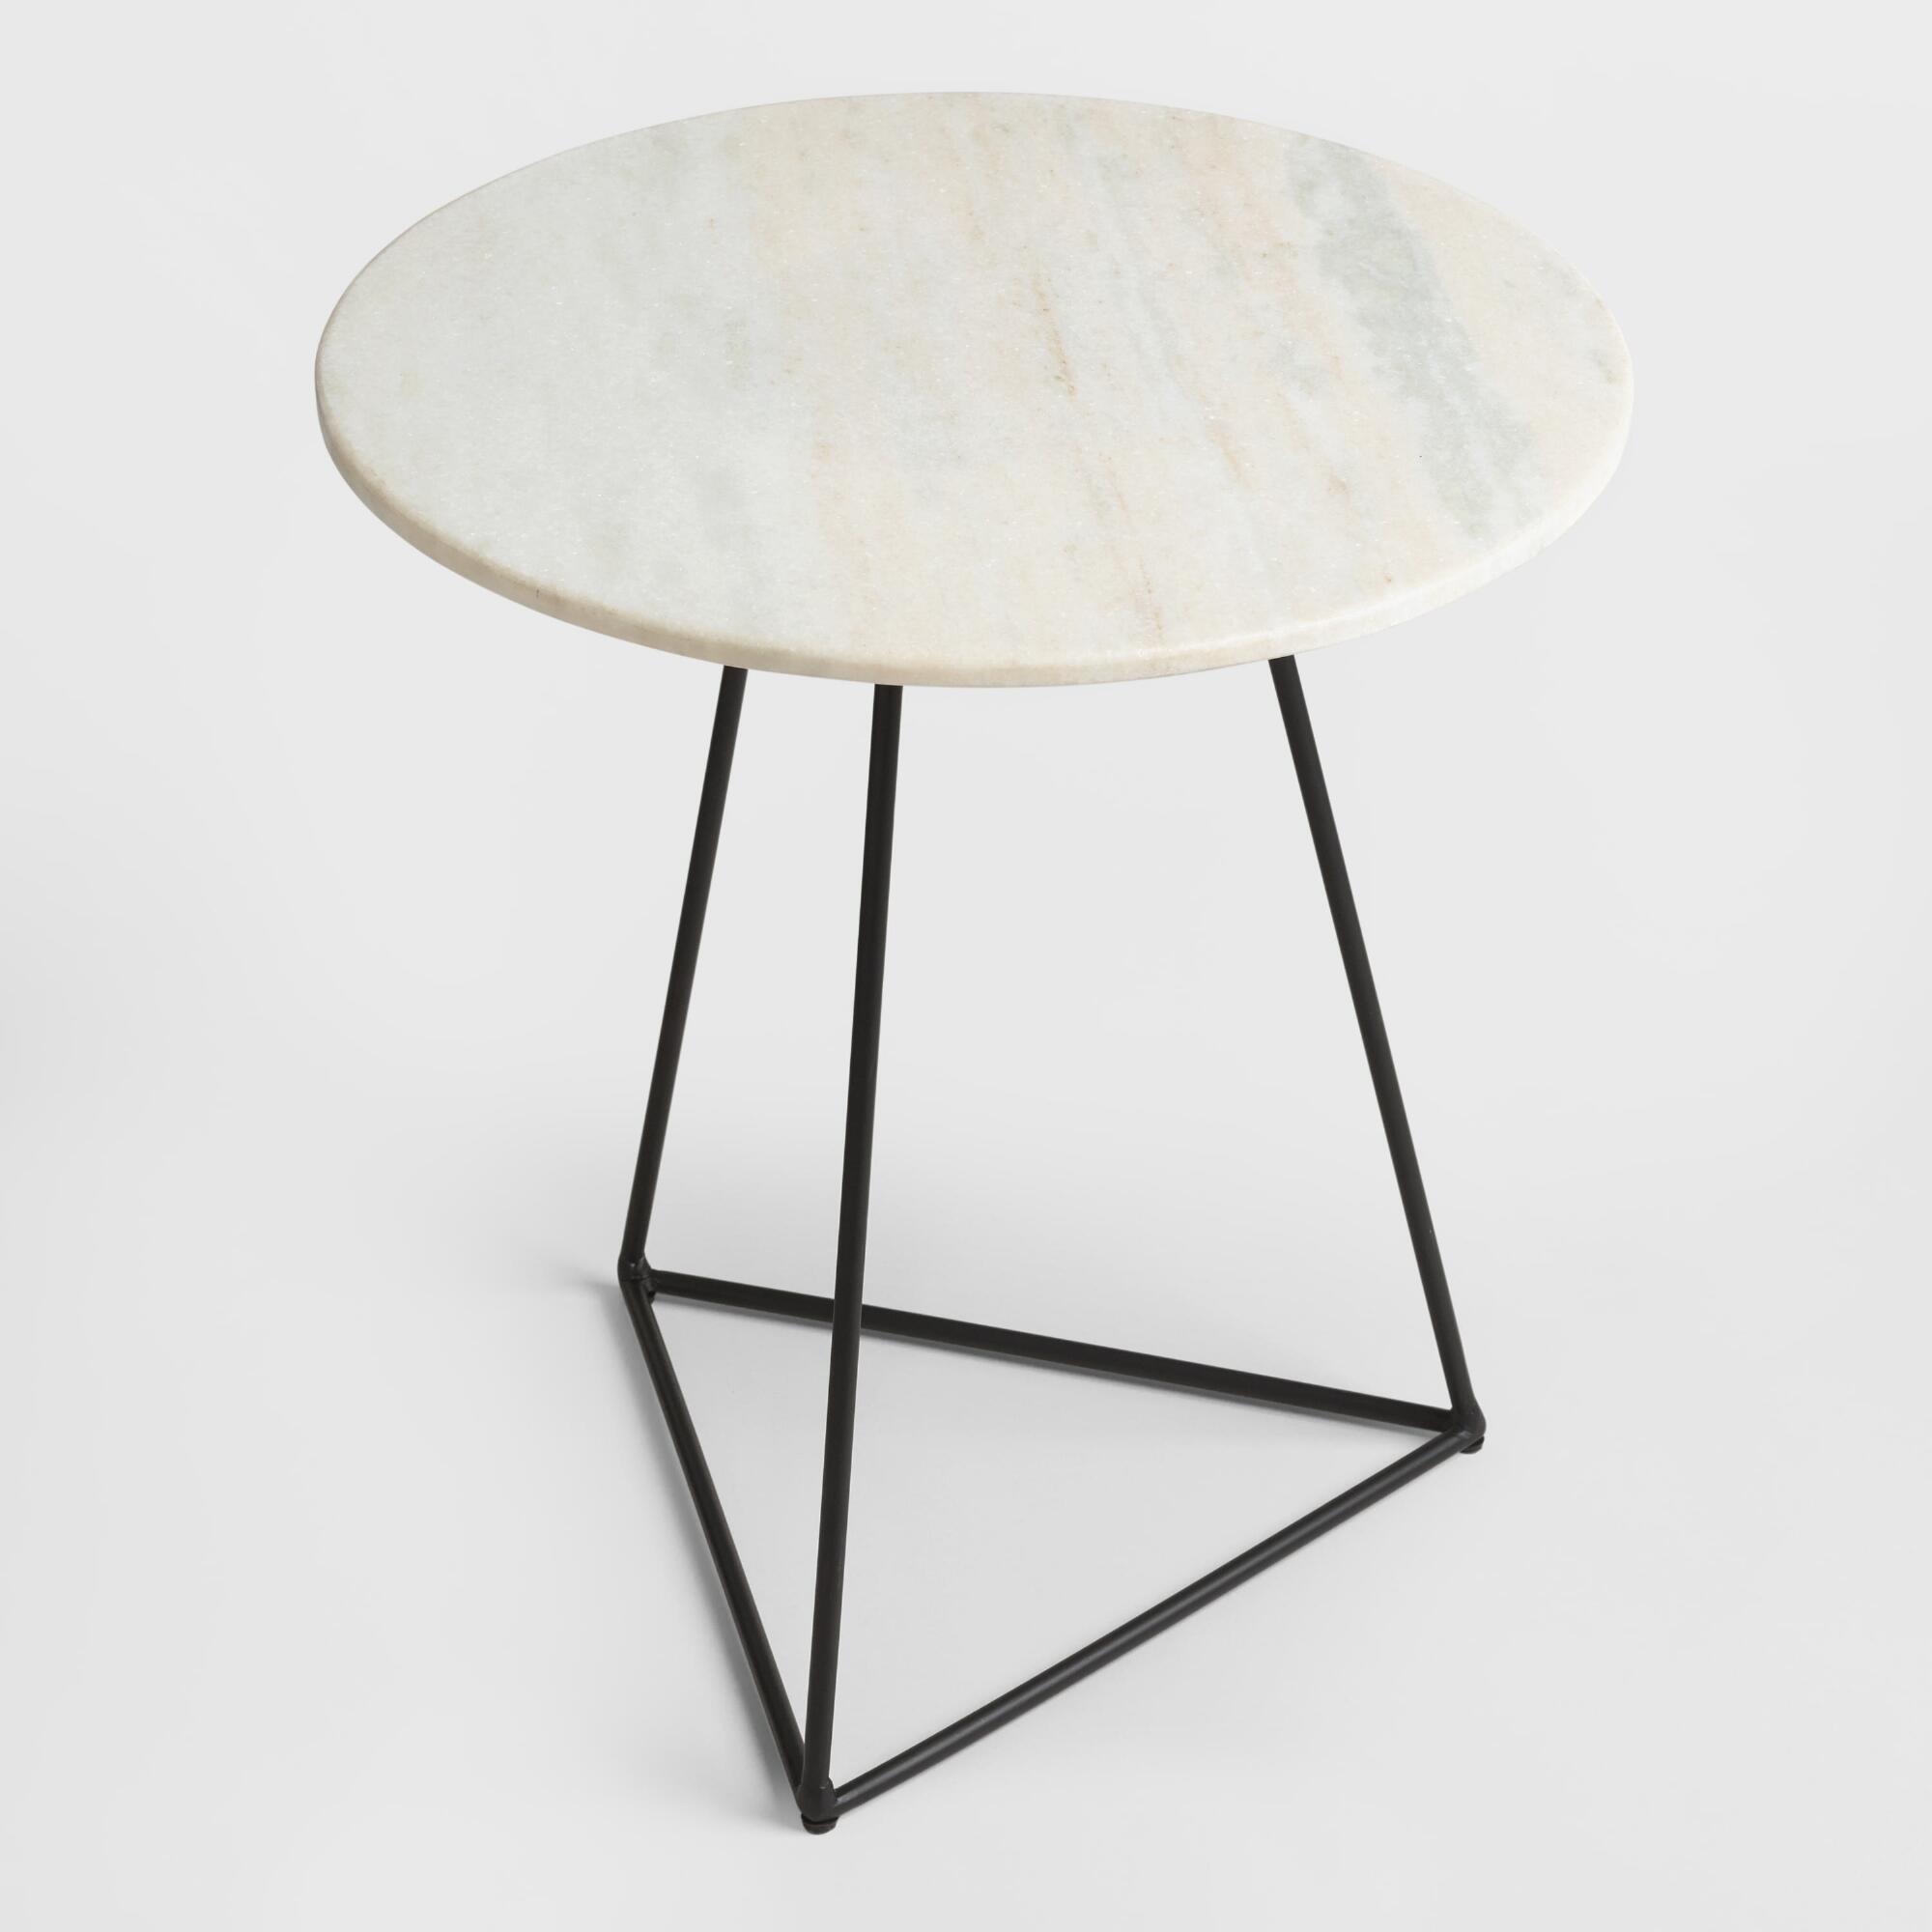 white marble and metal round accent table world market products desktop computer stand electric drum set couch ideas oversized reading chair target nate berkus rug skinny navy end